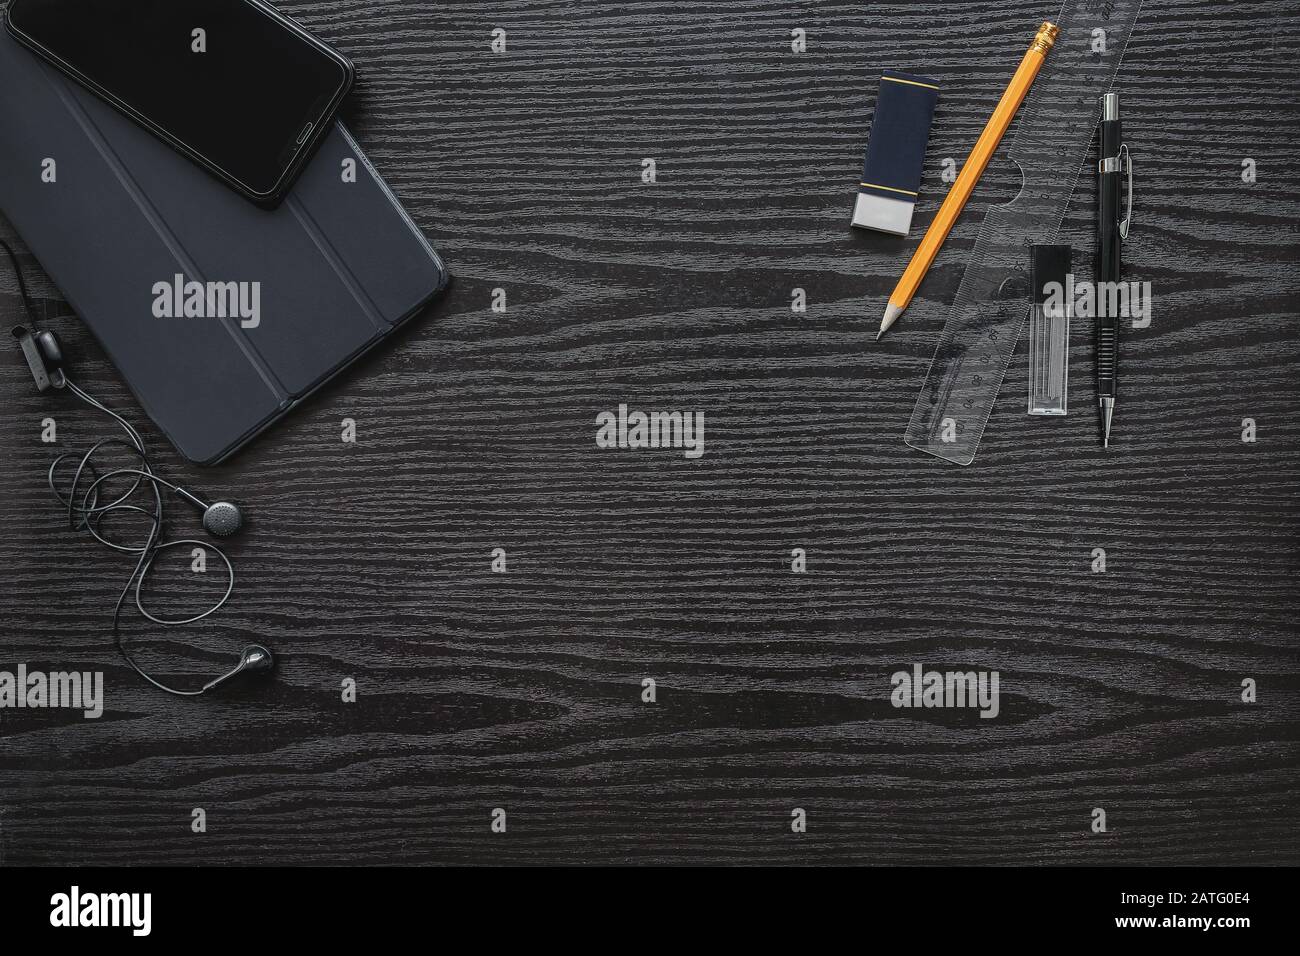 On a black office desk with a wooden texture are a tablet, phone, headphones, and on the other side of the table are stationery Stock Photo